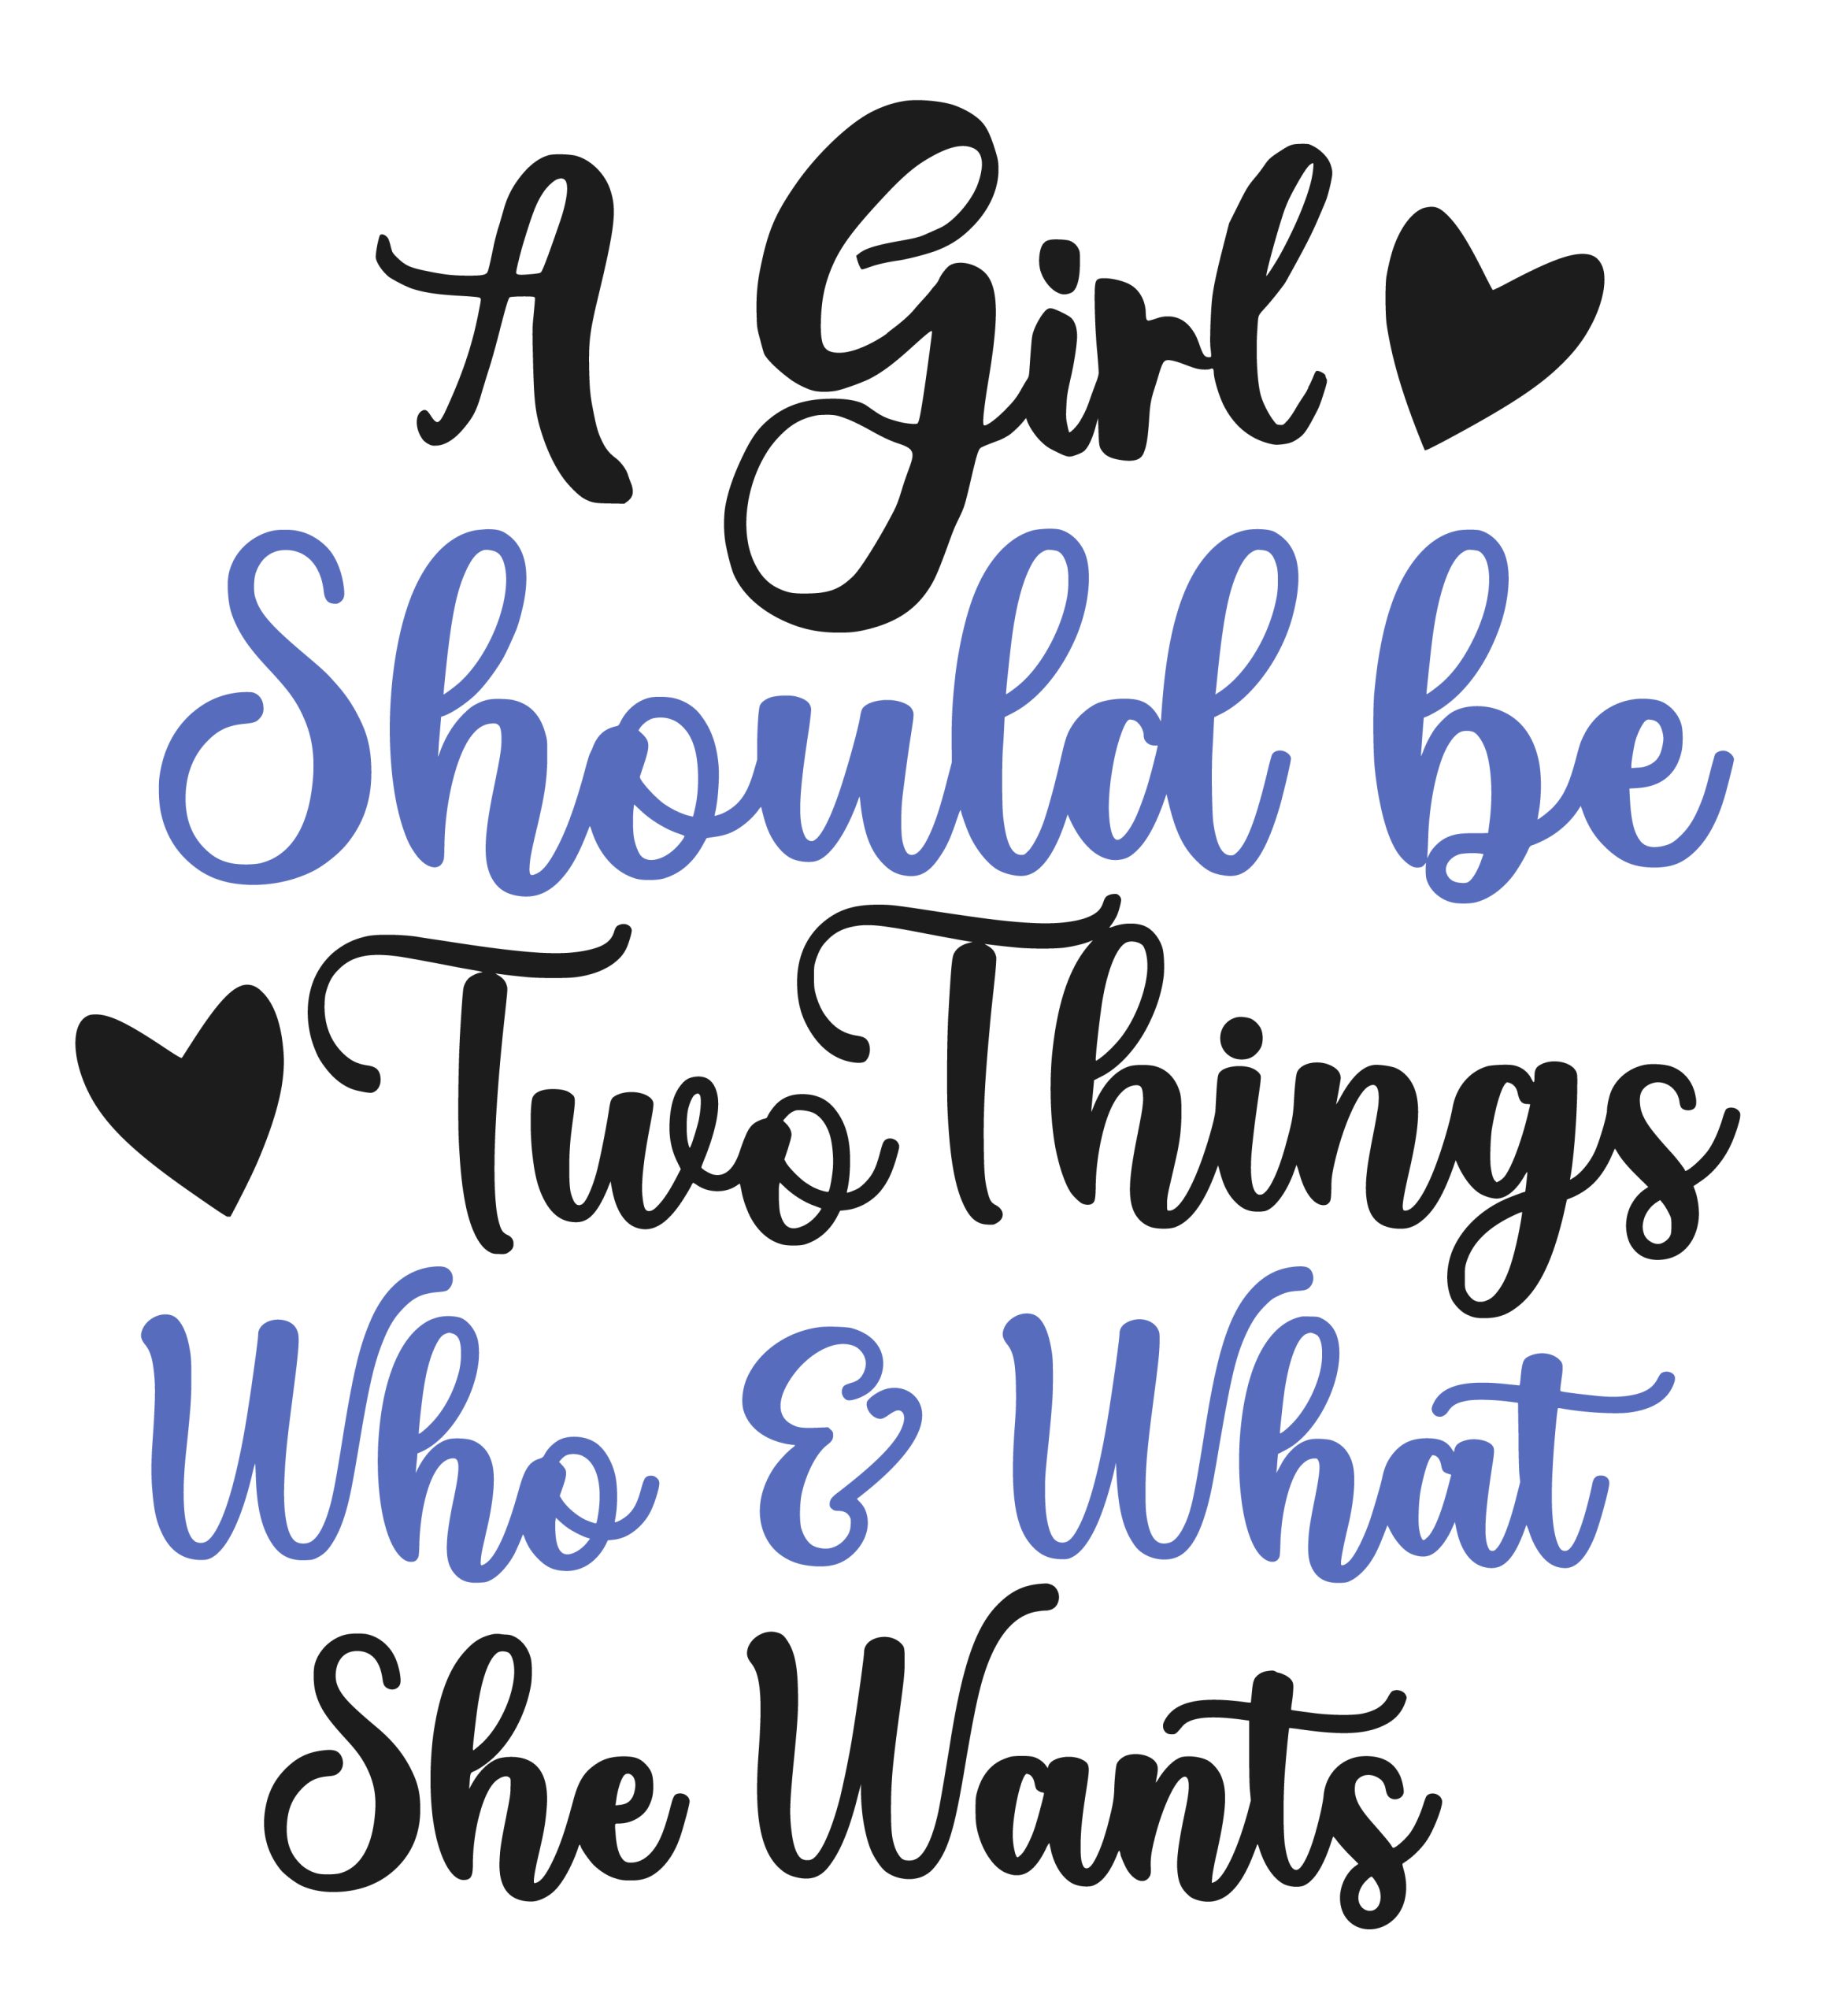 A Girl Should be two things who & what she wants SVG Boss Lady  Black Lives Matter  Lady Woman Diva Tshirt Cut File Cricut Silhouette Women Empowerment svg Feminism svg Girl Power